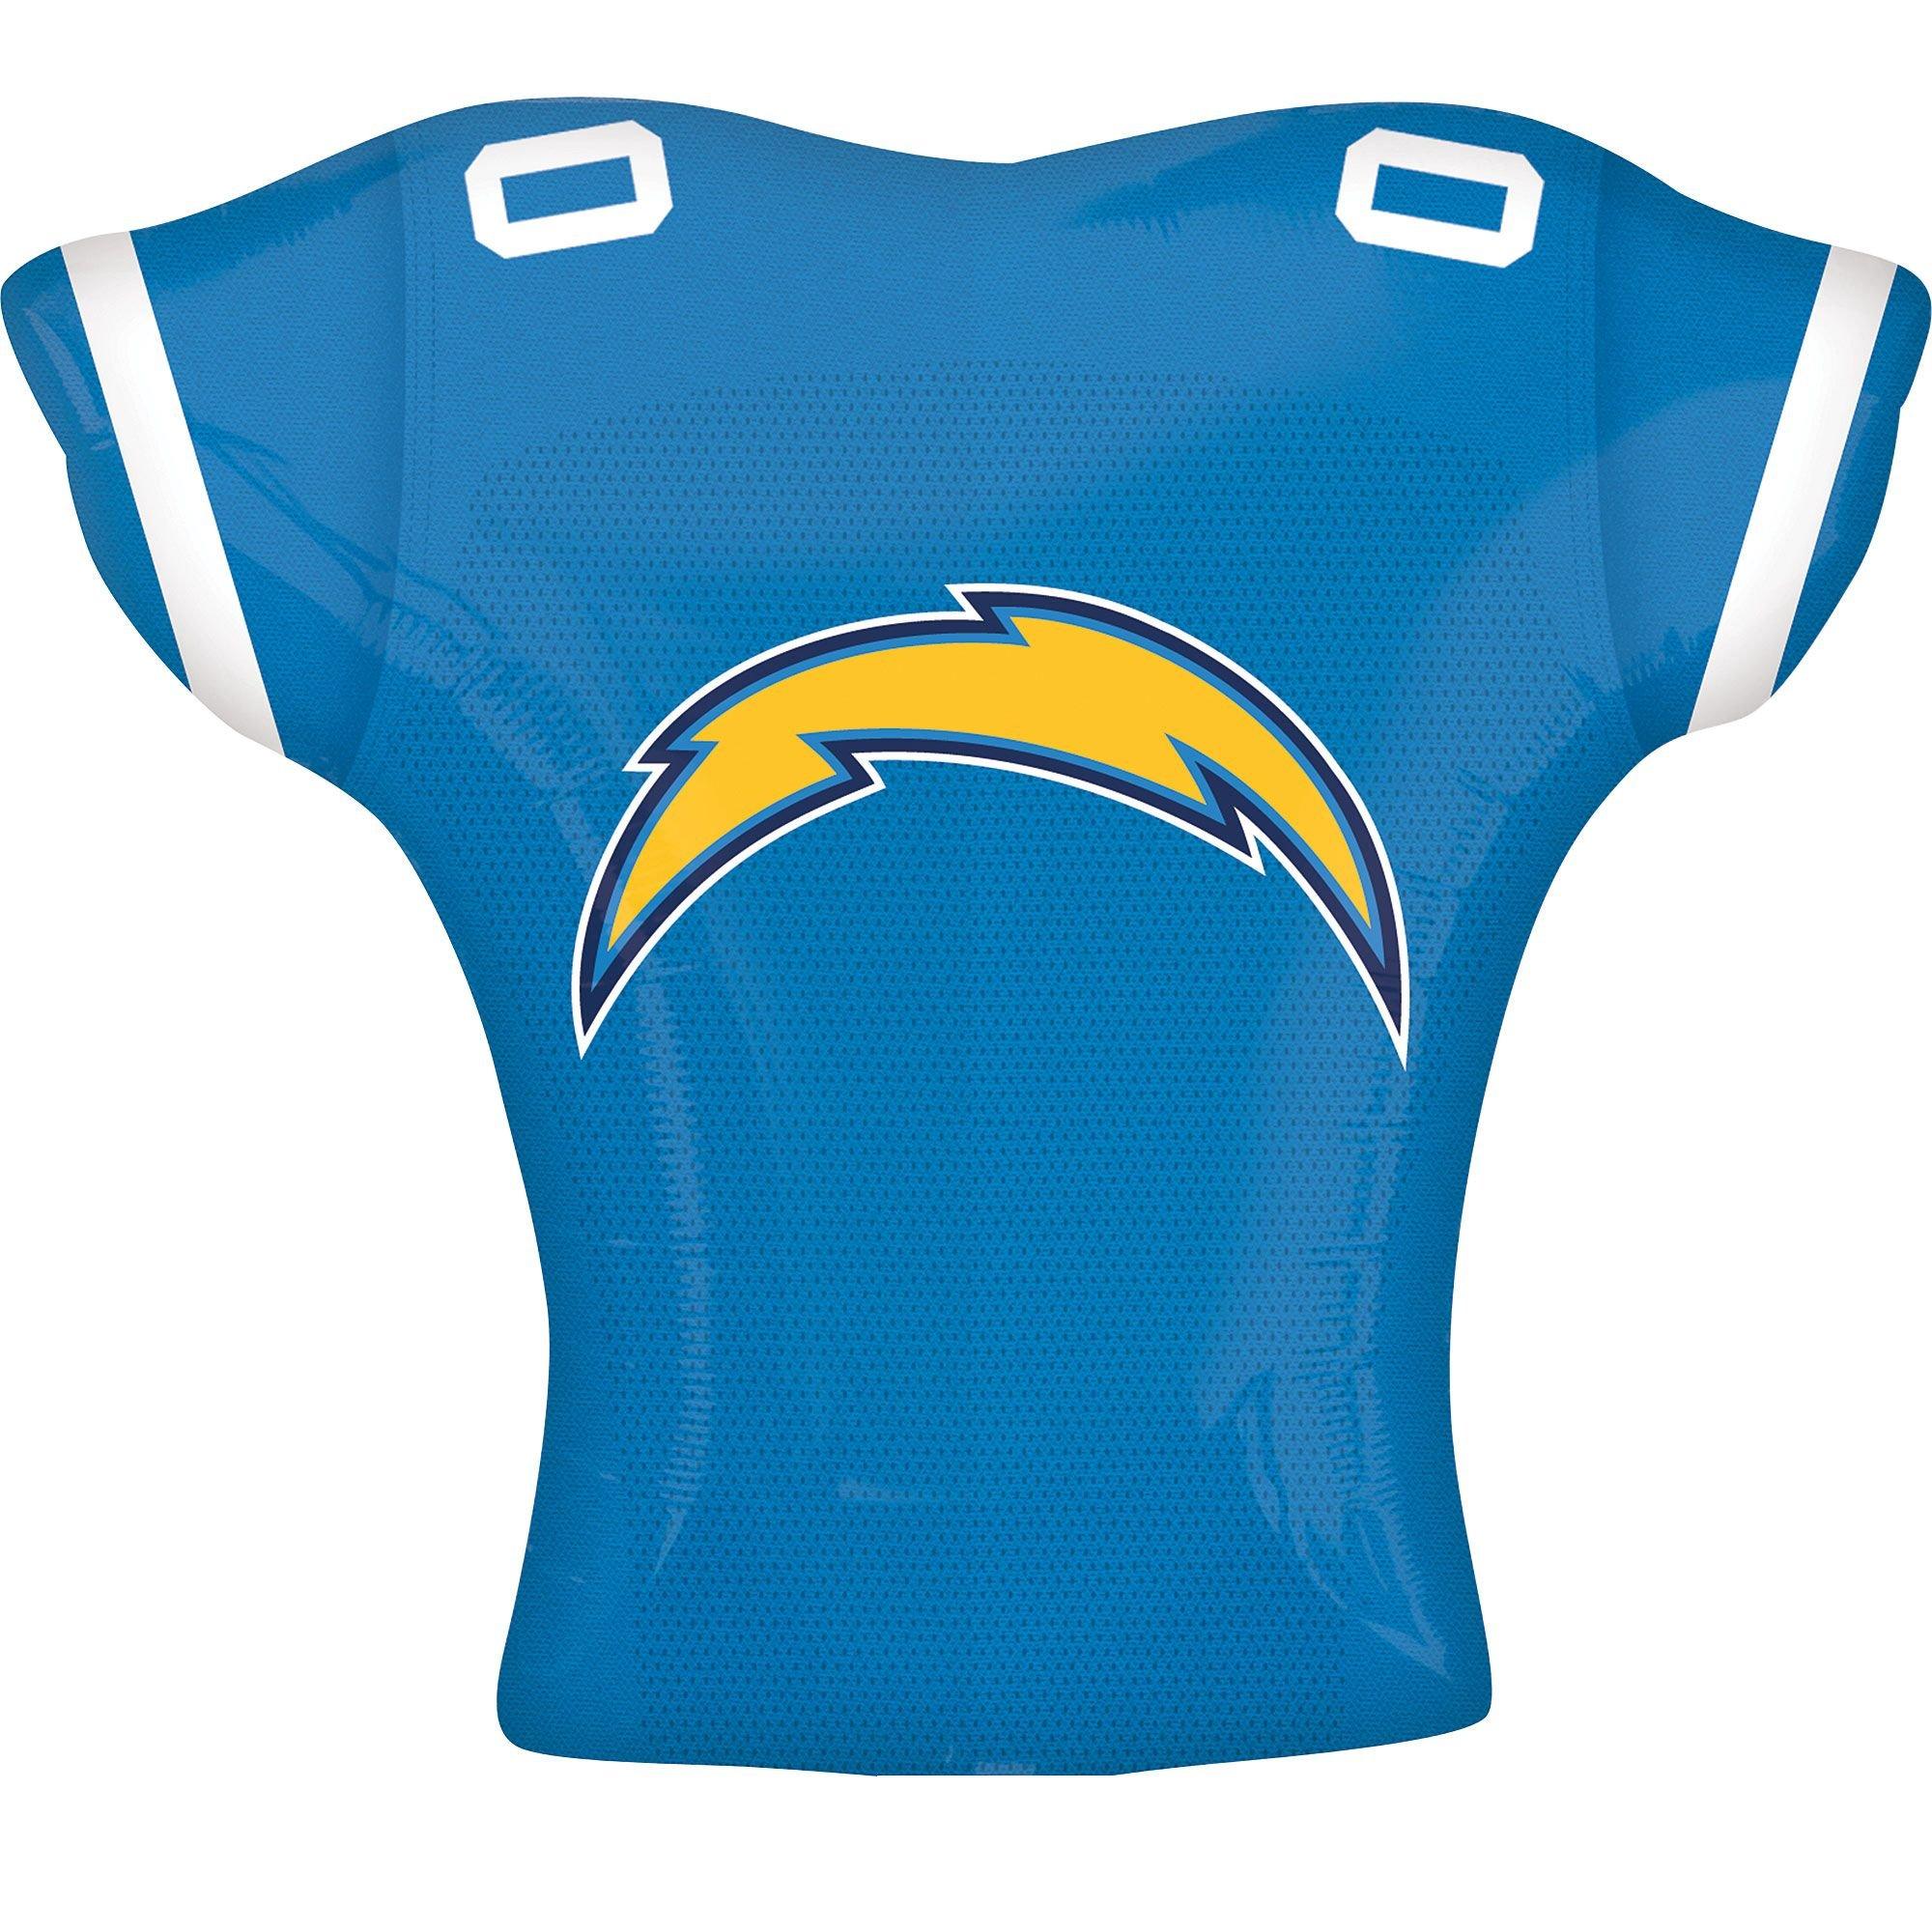 Los Angeles Chargers Apparel, Los Angeles Chargers Jerseys, Los